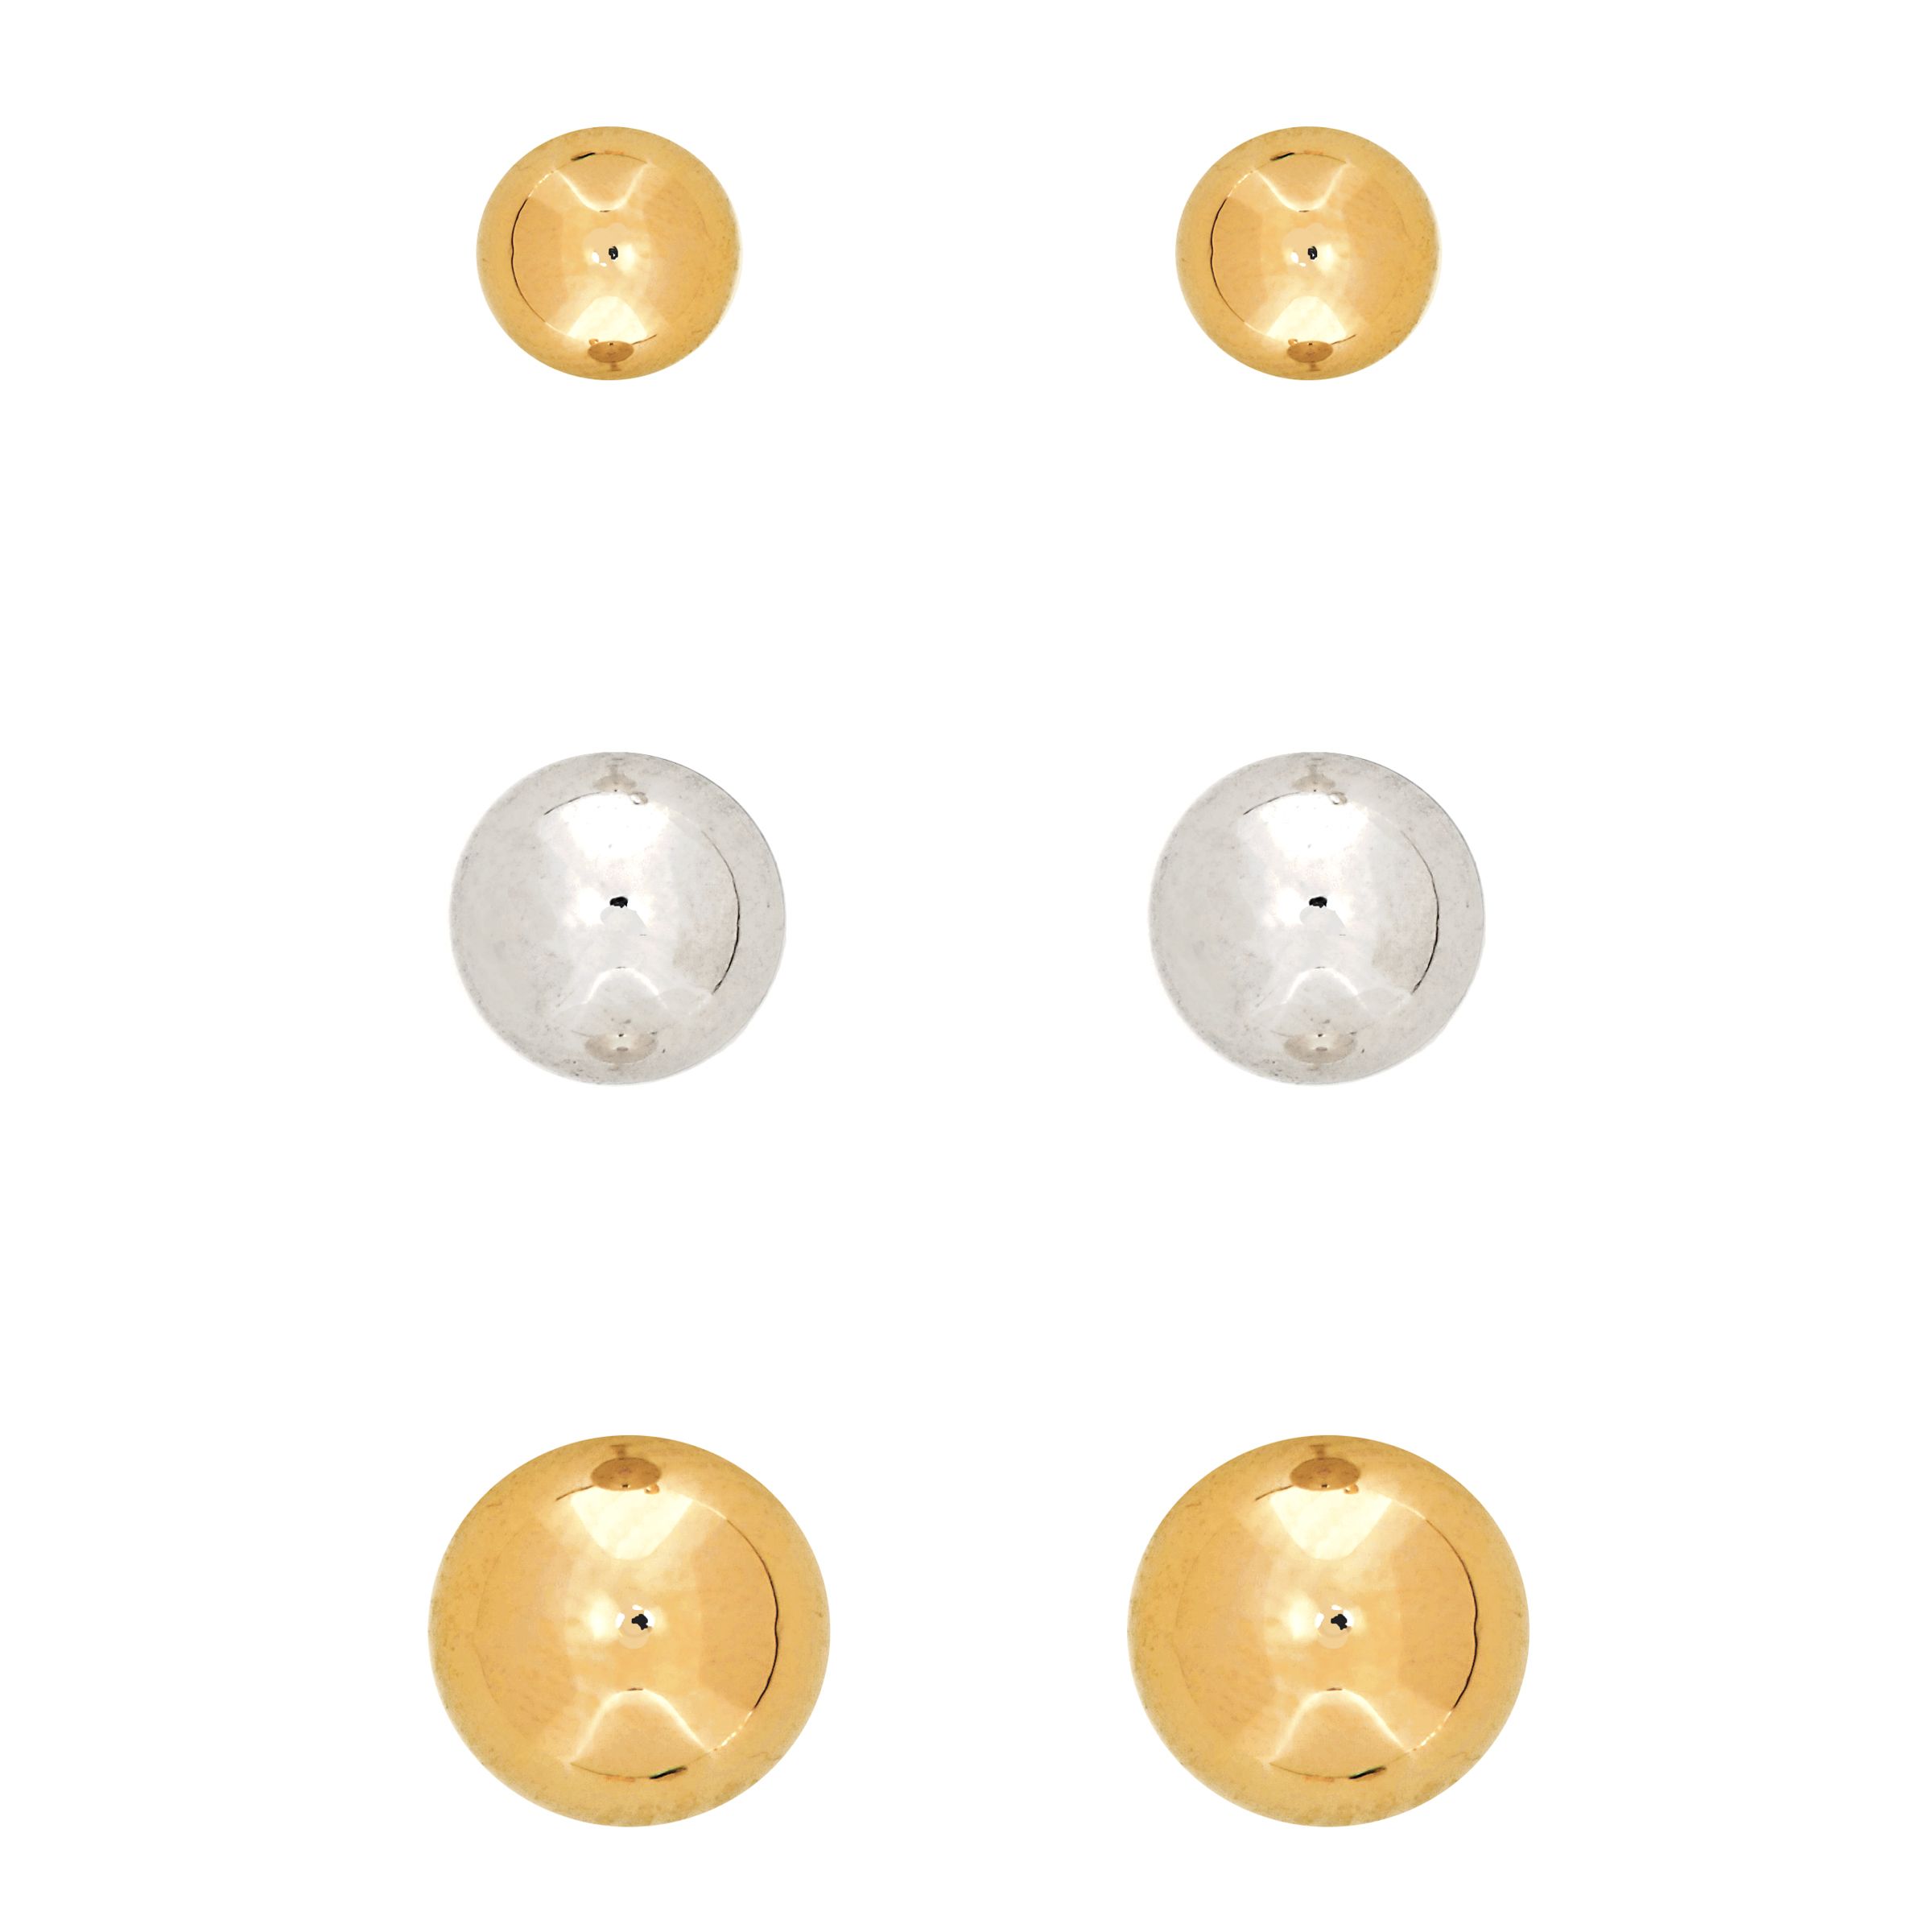 1MM, 4MM and 5MM Ball Stud Earring Set. 10K Yellow and White Gold